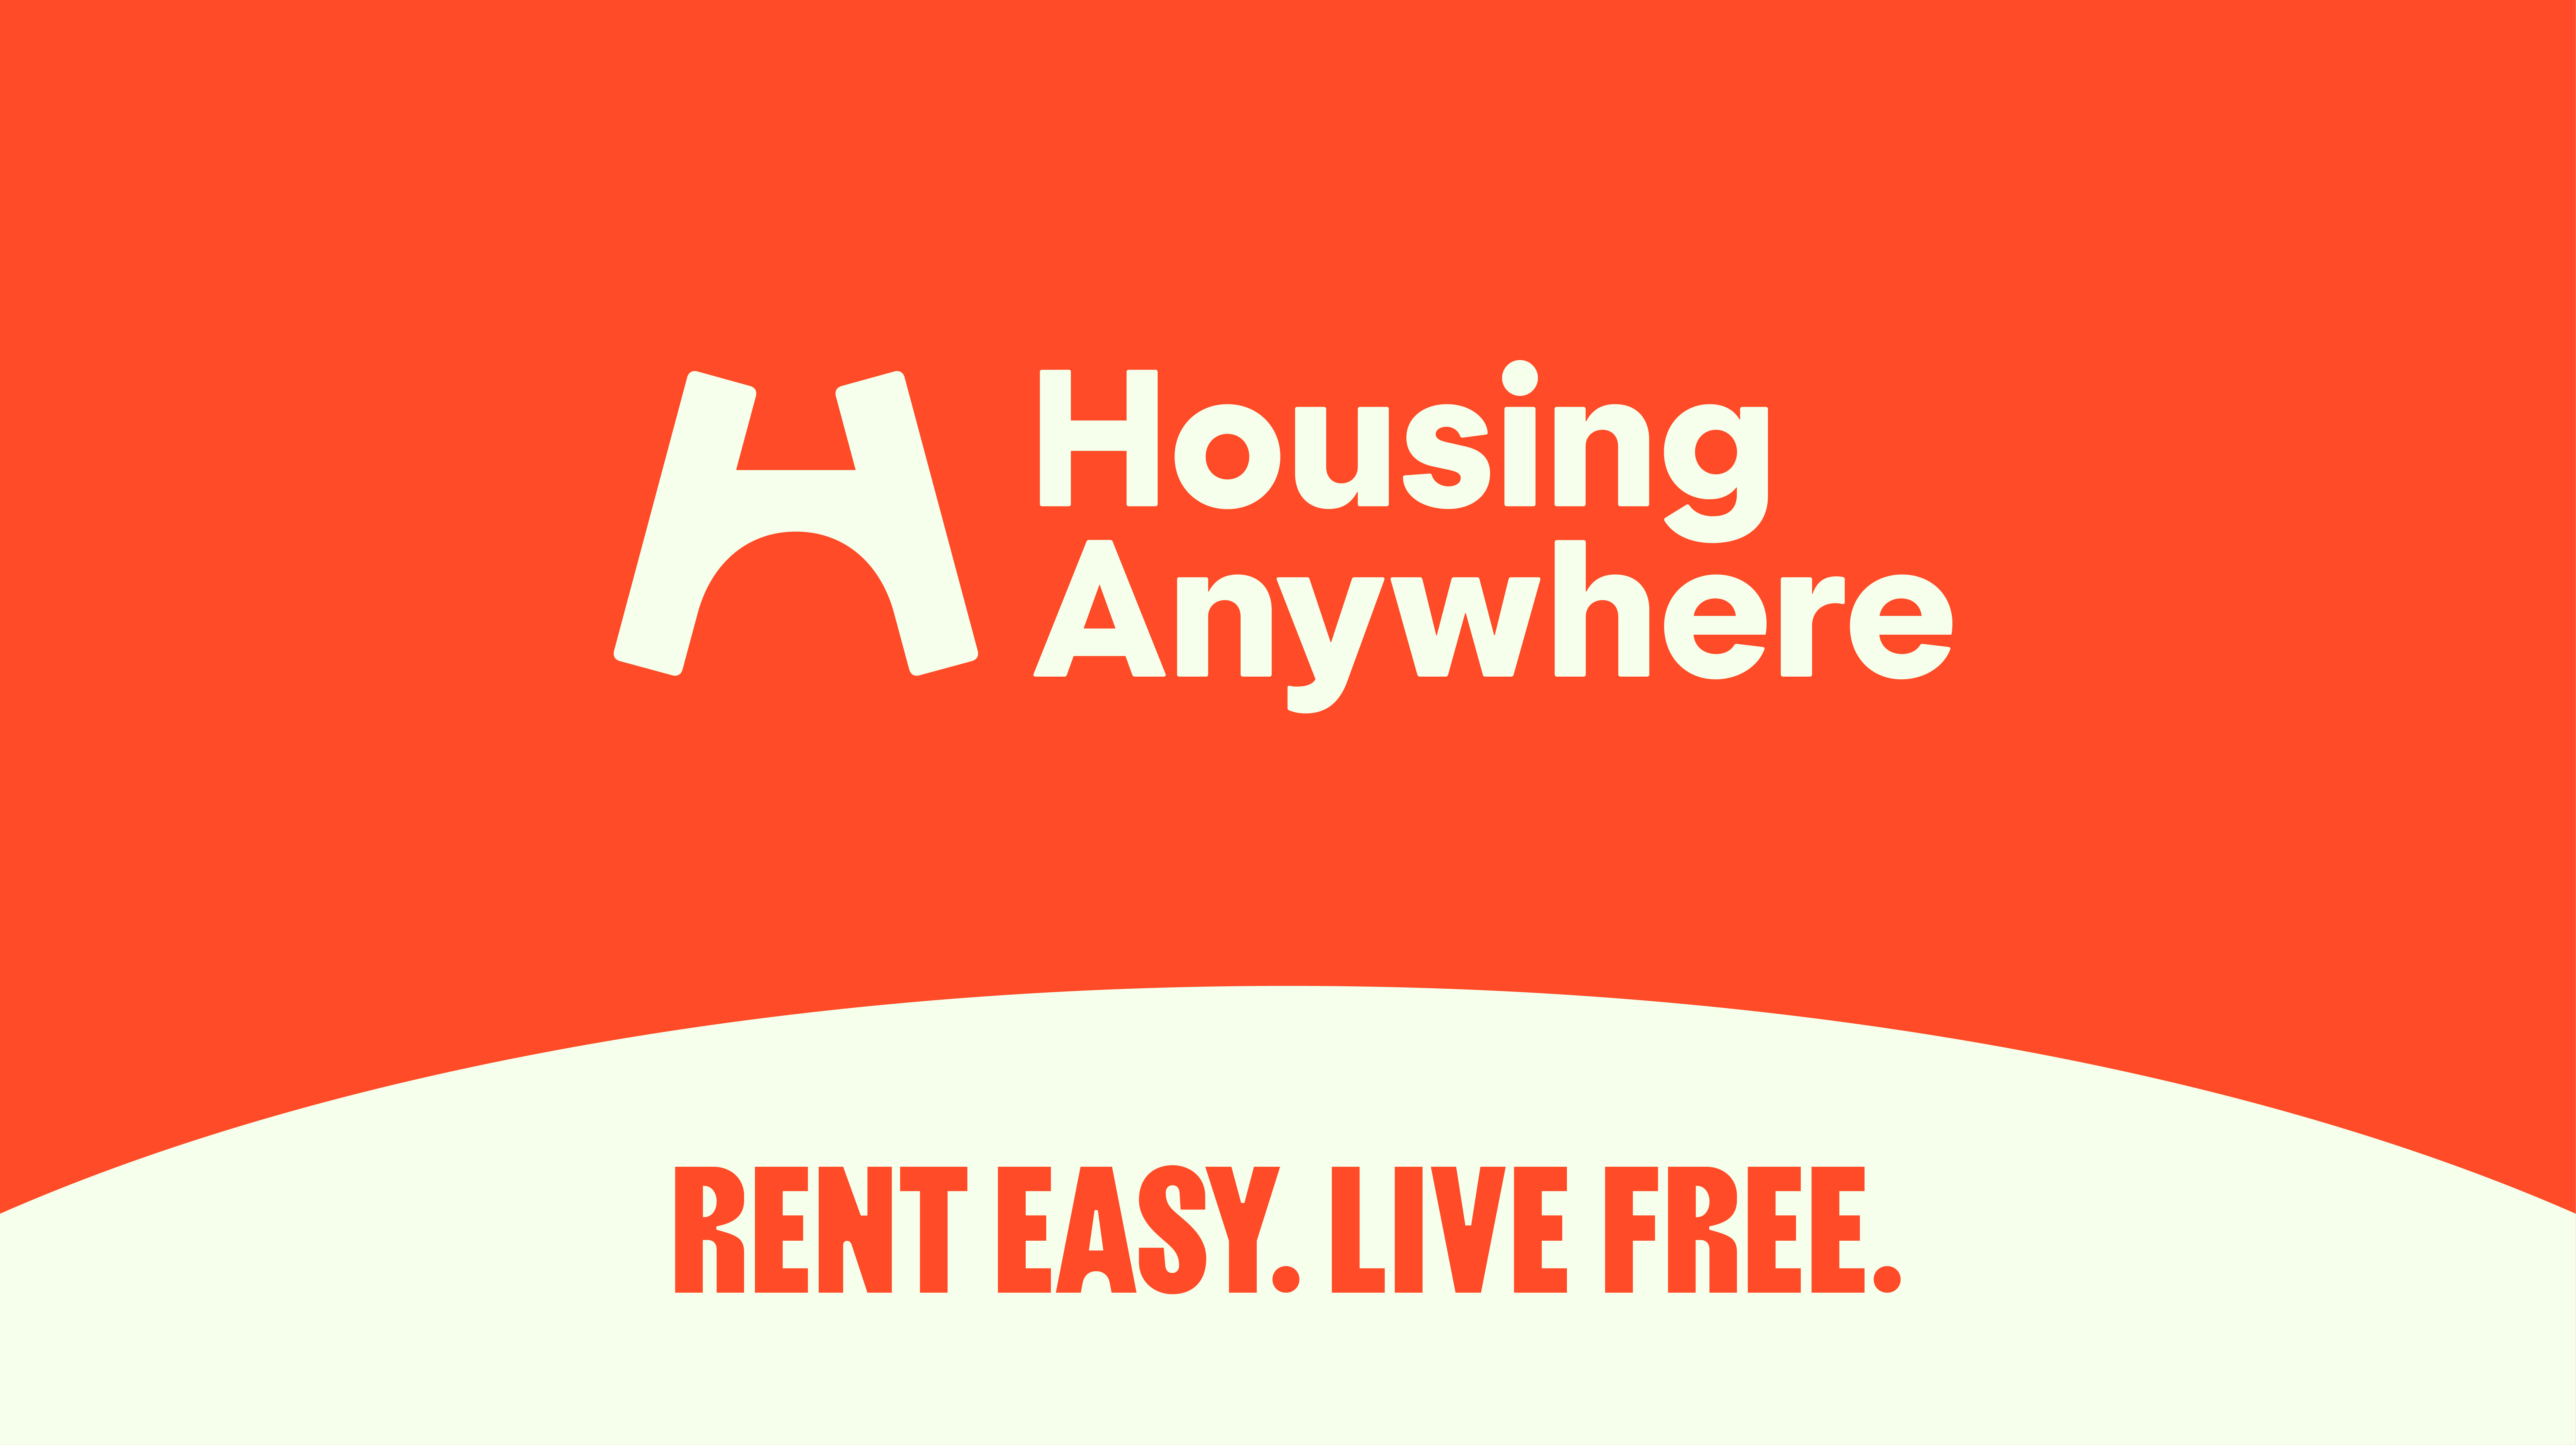 HousingAnywhere commits to setting a new standard of renting with new brand identity